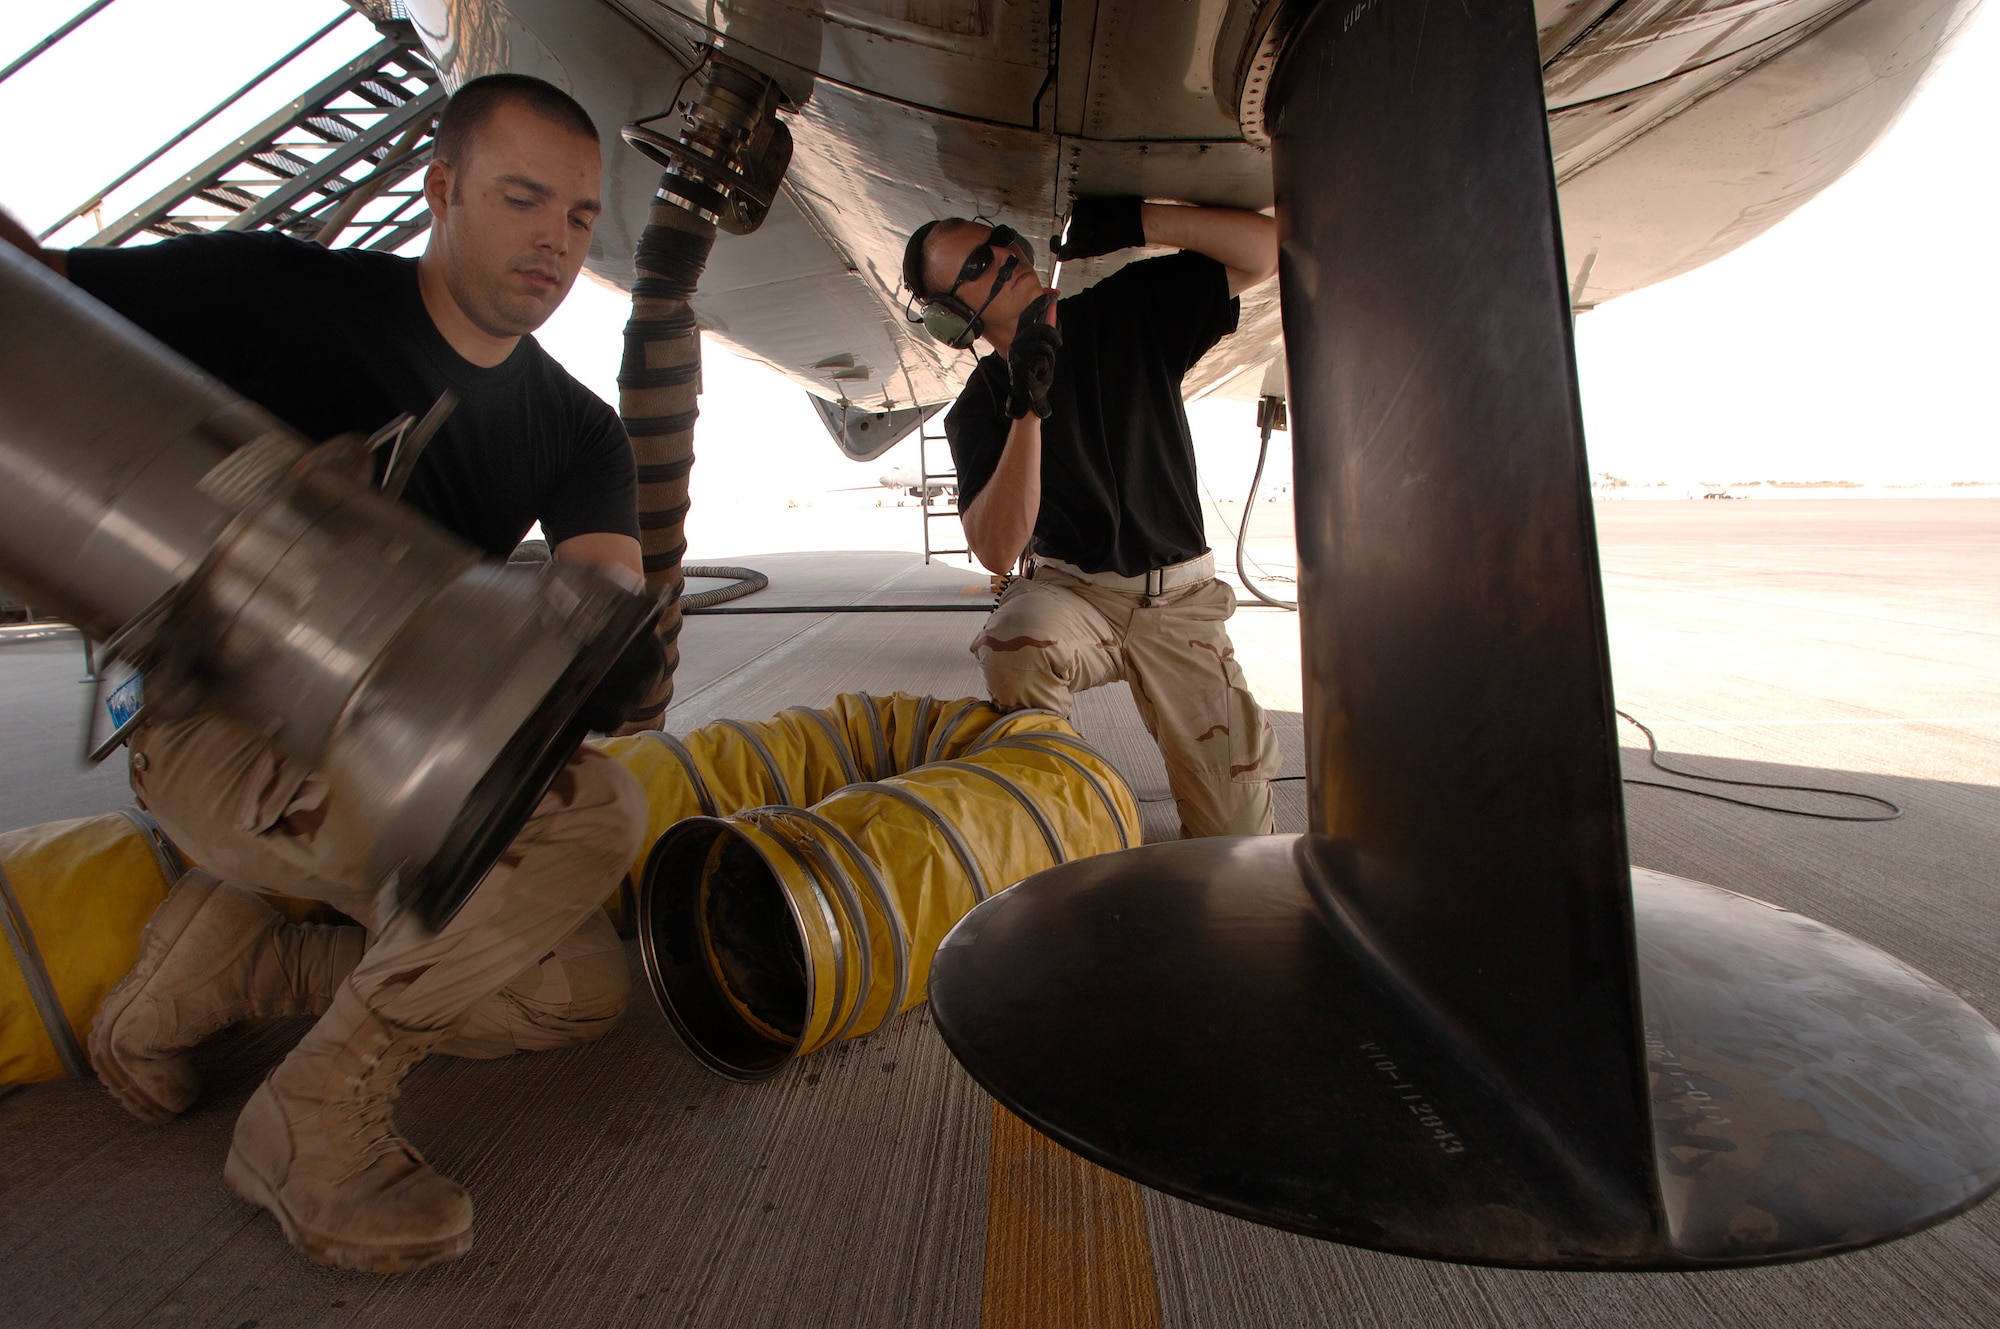 Senior Airman Matthew Campbell and Airman 1st Class Jonathan Campana remove one of many air conditioning hoses on an RC-135 Rivet Joint reconnaissance aircraft prior to its departure for a mission over southwest Asia. The hoses help maintain cool temperatures for the extensive inventory of electronics aboard the plane during its lengthy start up process. Both crew chiefs are deployed from the 55th Aircraft Maintenance Squadron from Offutt Air Force Base, Neb. (U.S. Air Force photo/Master Sgt. Scott Wagers)